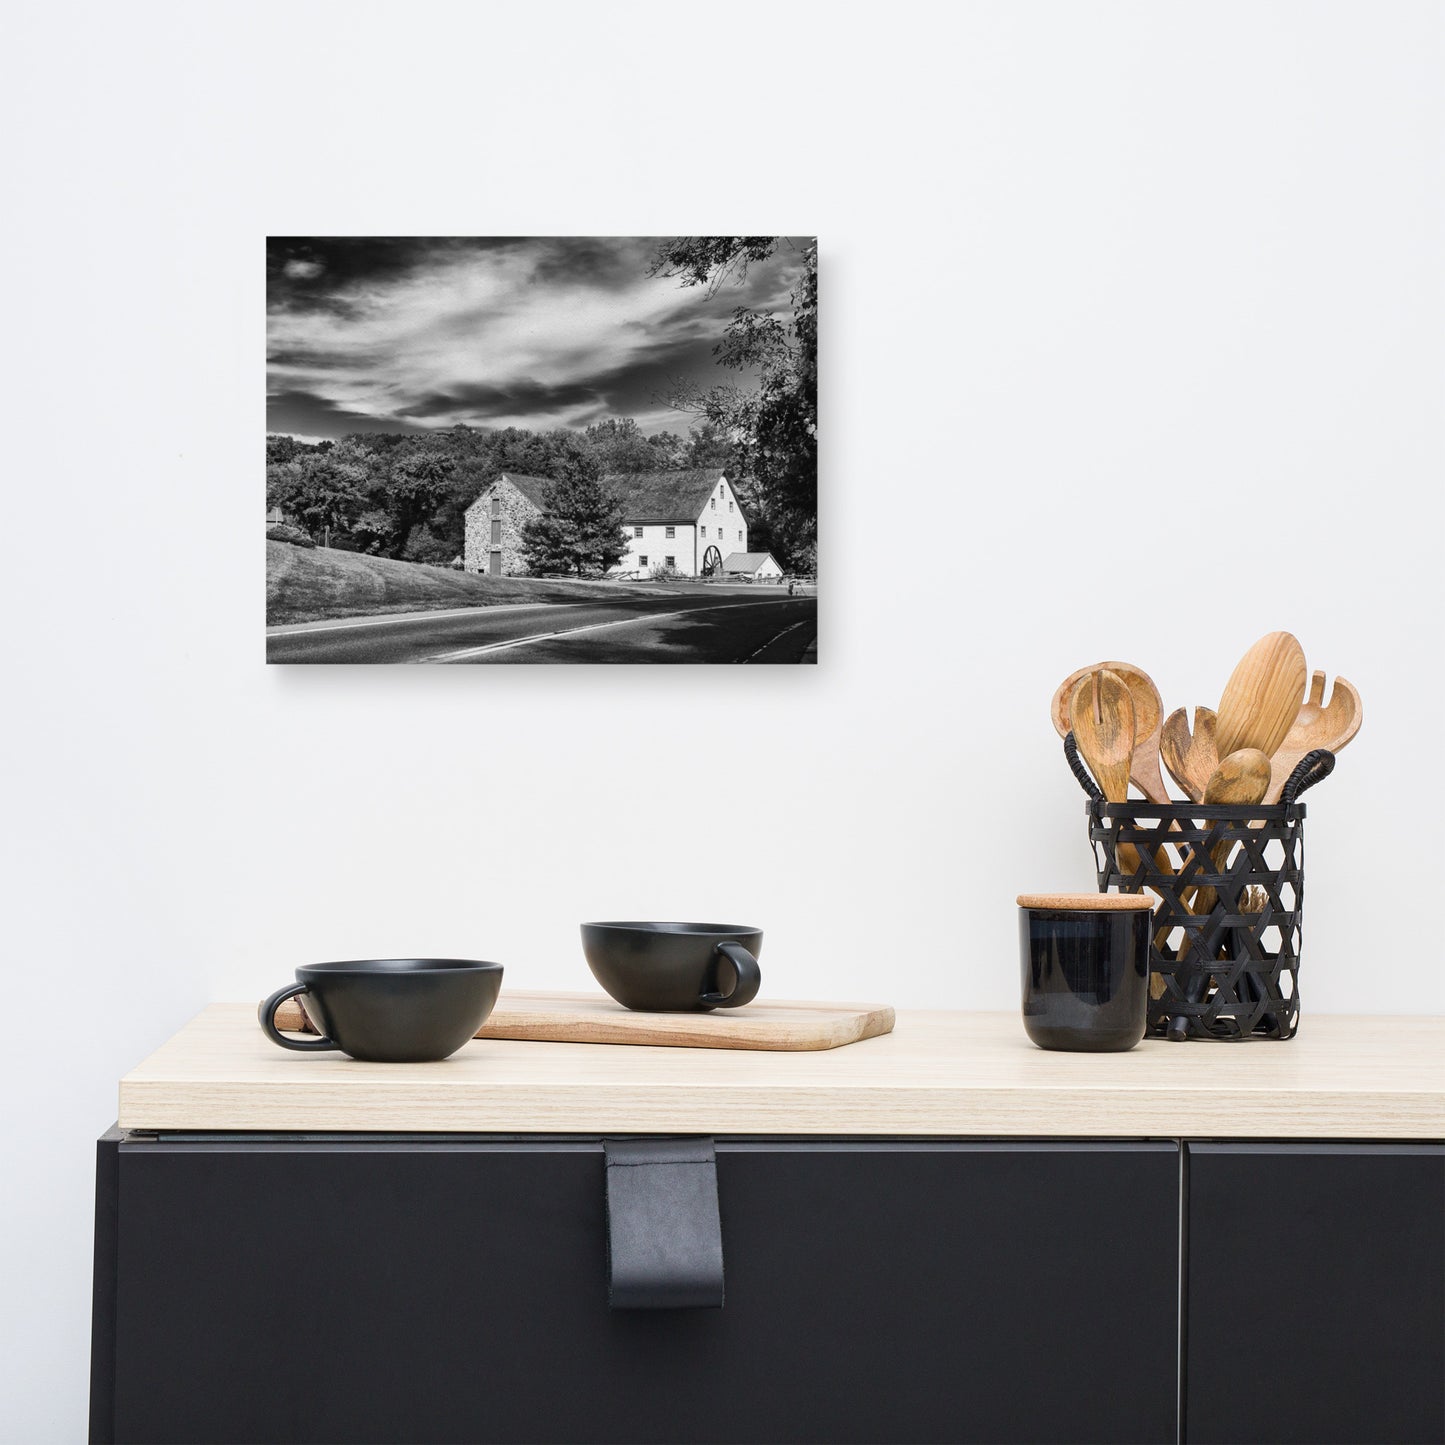 Greenbank Mill - Summer Black and White Rural Landscape Canvas Wall Art Prints